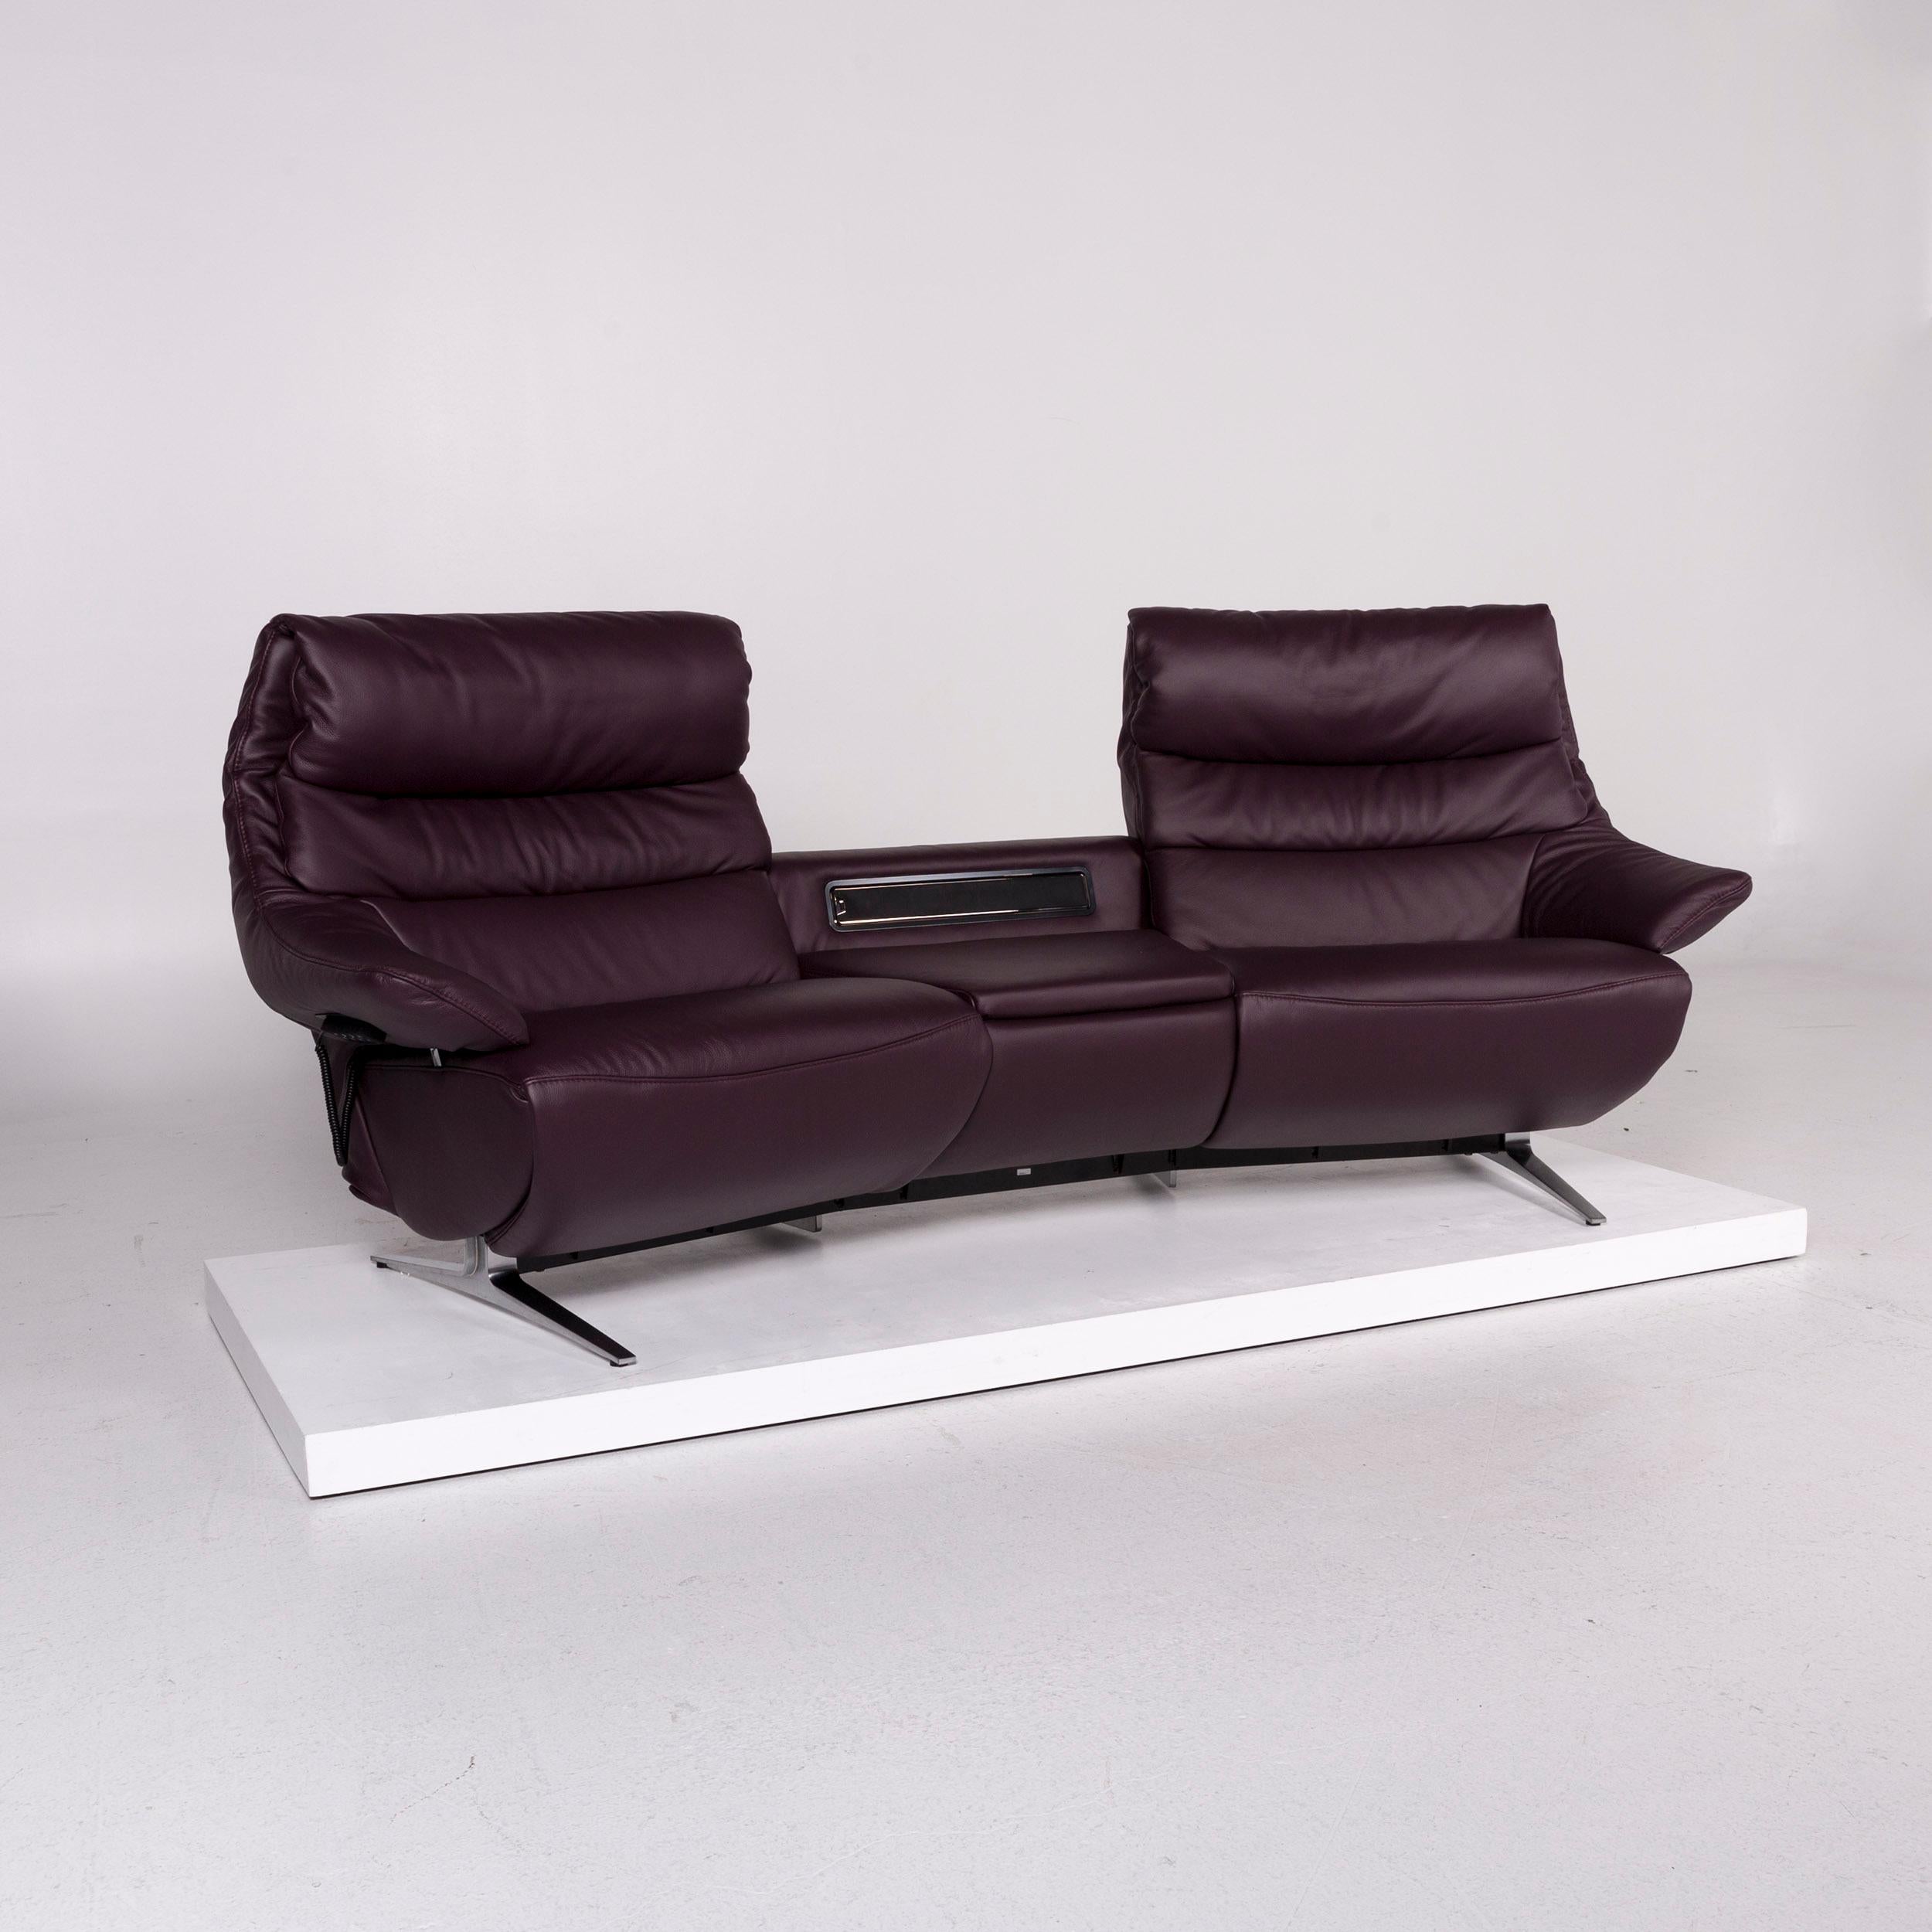 We bring to you a Himolla leather sofa eggplant purple relax function electrical function couch.


 Product measurements in centimeters:
 

Depth 103
Width 253
Height 101
Seat-height 48
Rest-height 58
Seat-depth 49
Seat-width